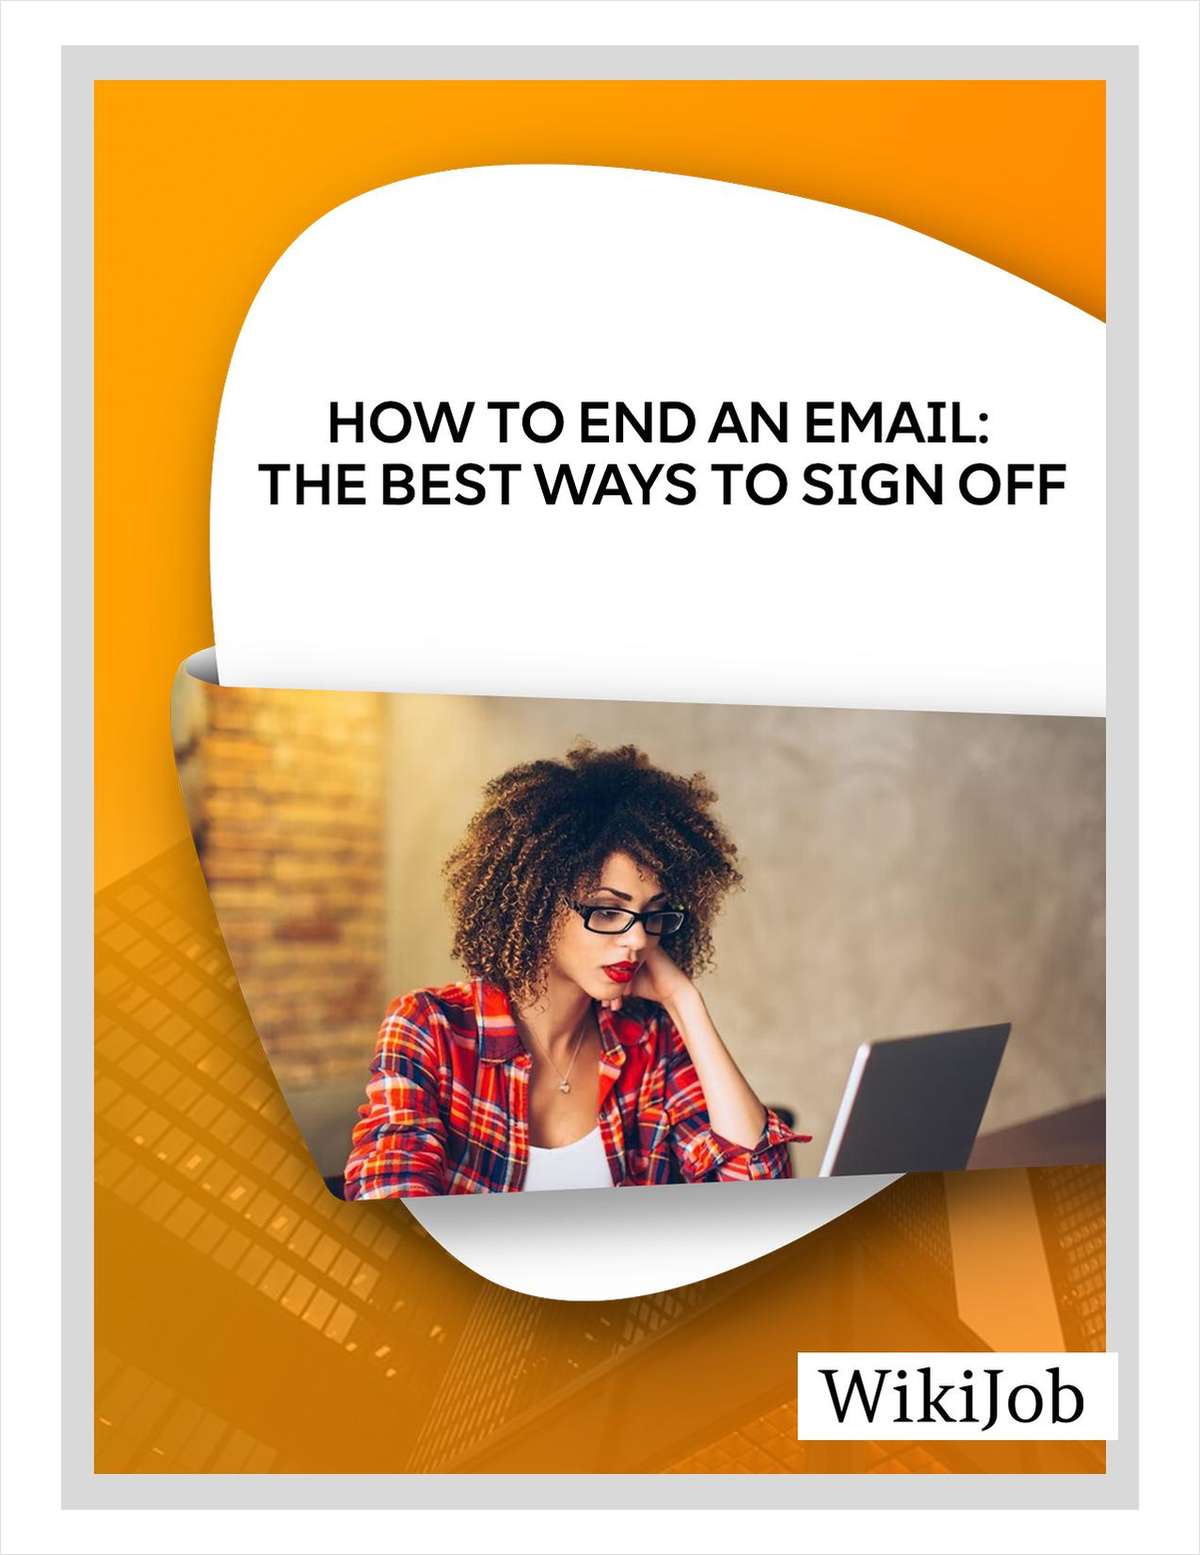 How to End an Email: The Best Ways to Sign Off